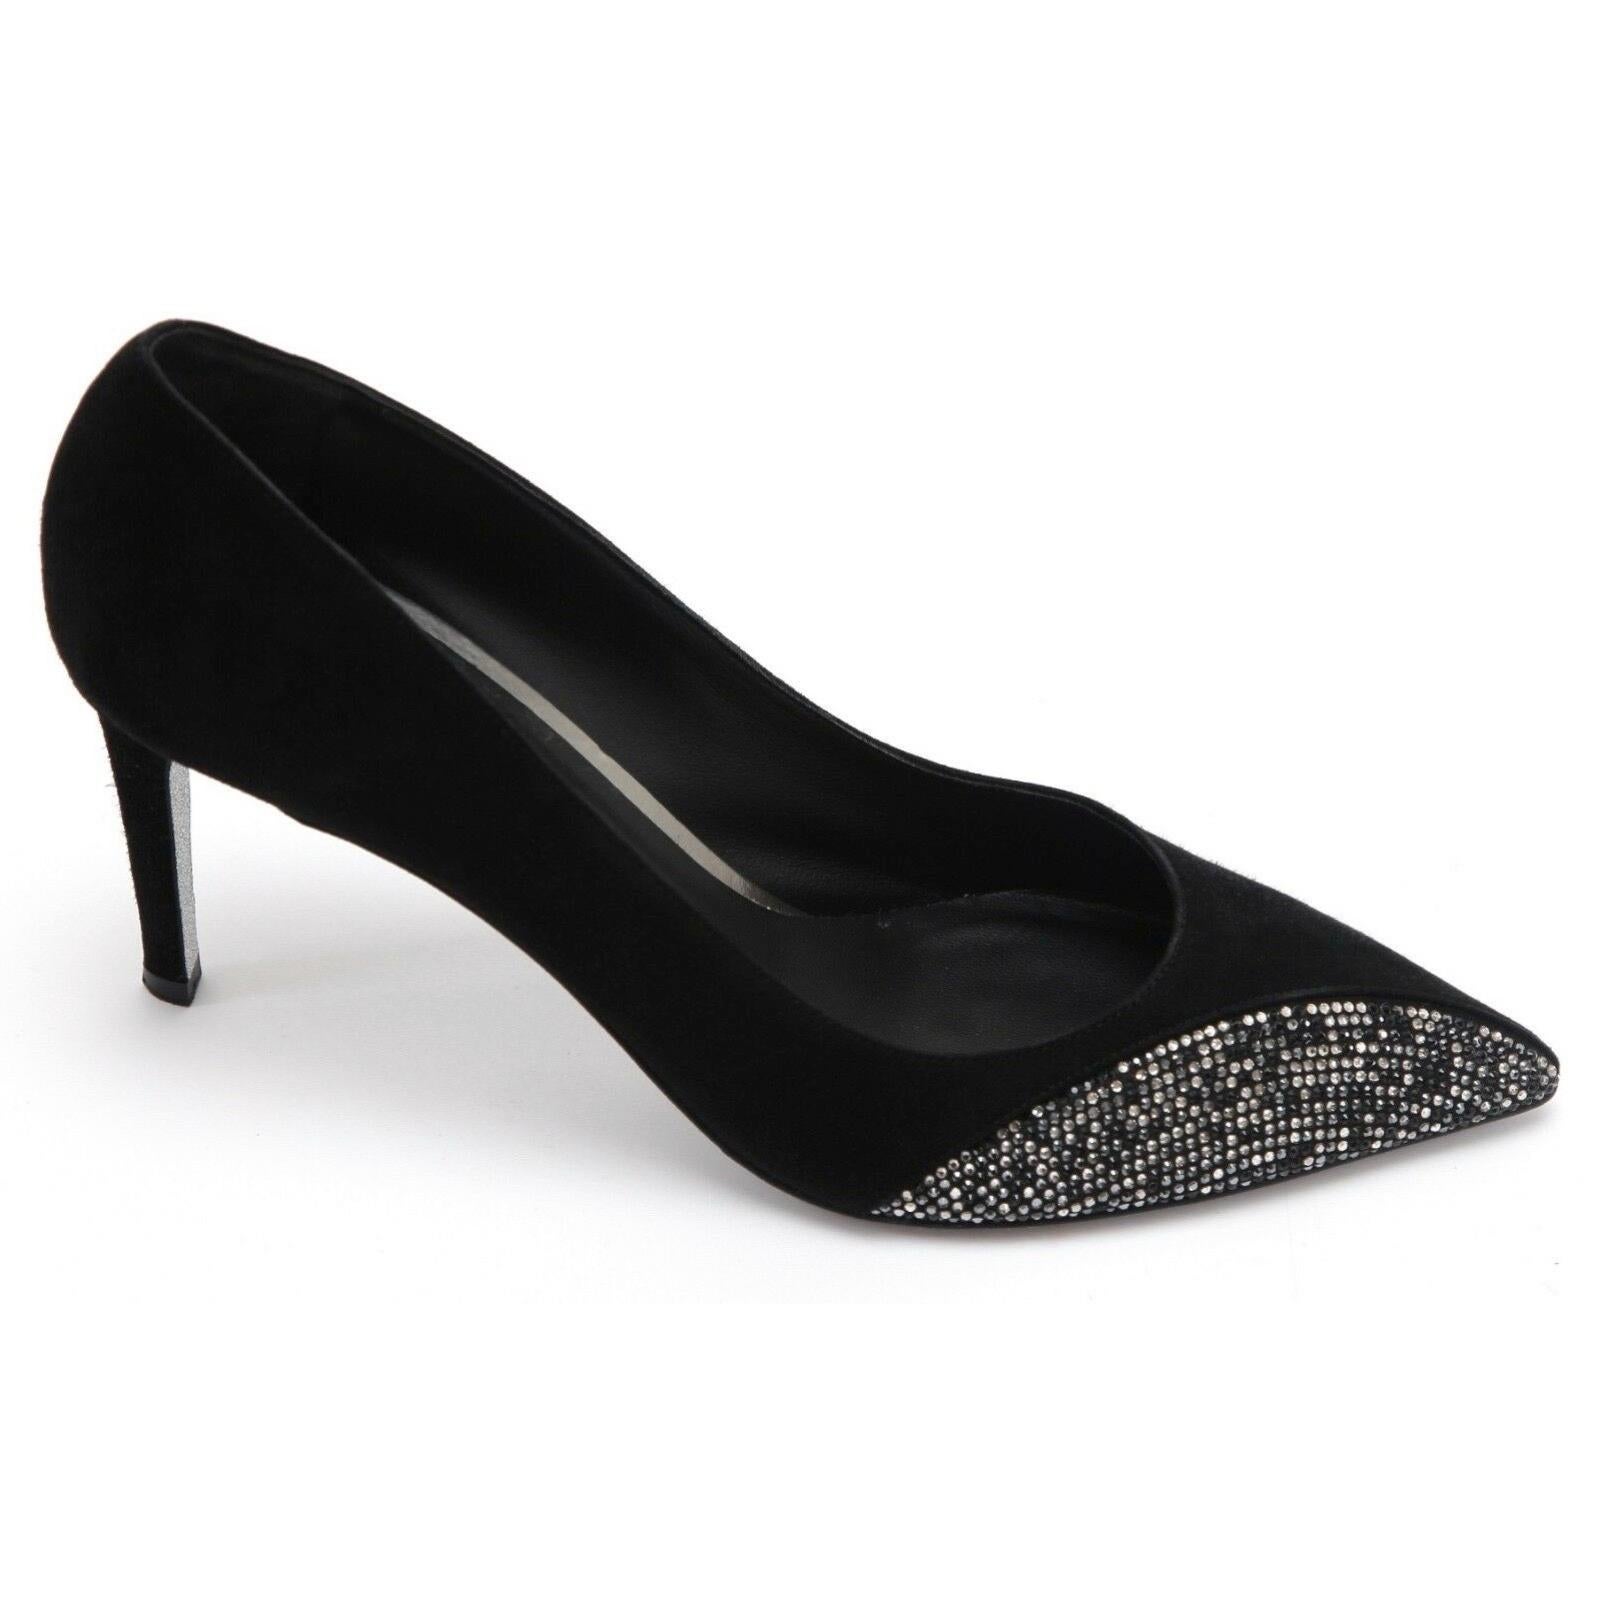 GUARANTEED AUTHENTIC RENE CAOVILLA BLACK SUEDE POINTED TOE PUMP WITH CRYSTAL EMBELLISHMENT



Design:
- Stunning black suede pointed toe pump.
- Black and white crystal embellishment outer foot area.
- Self-covered heel.
- Leather lining and